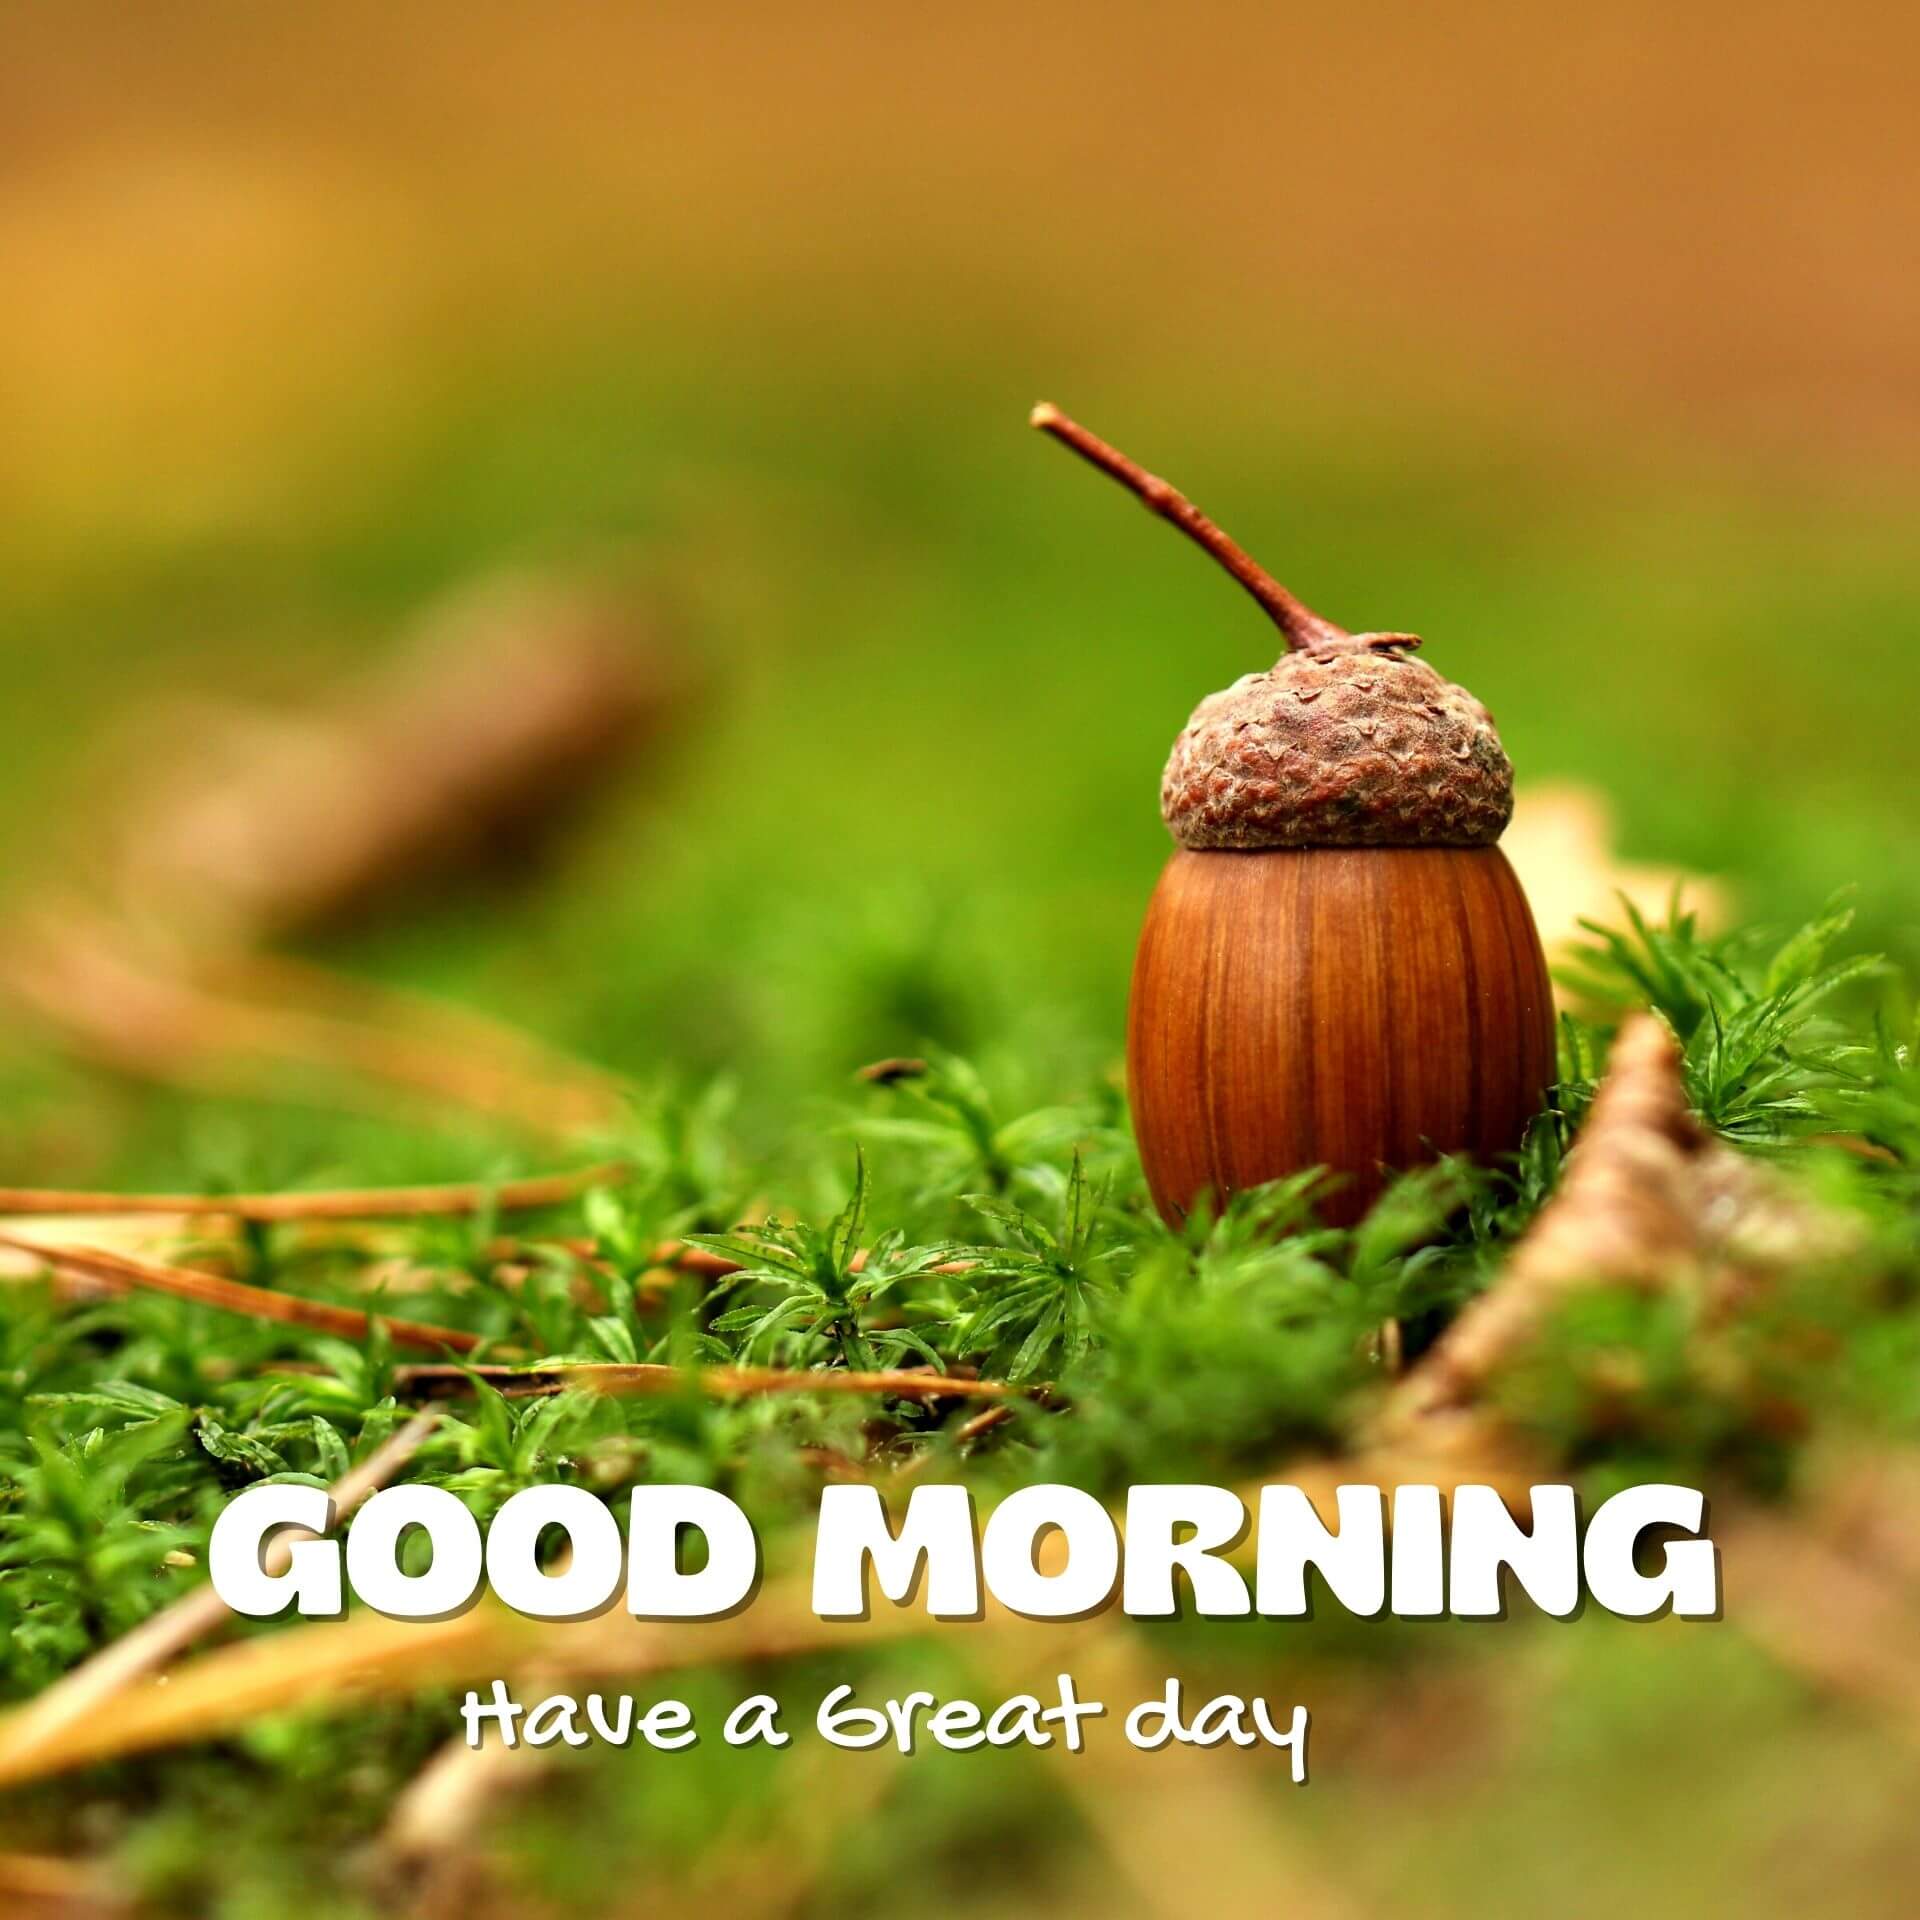 Good morning have a nice day Wallpaper for Facebook